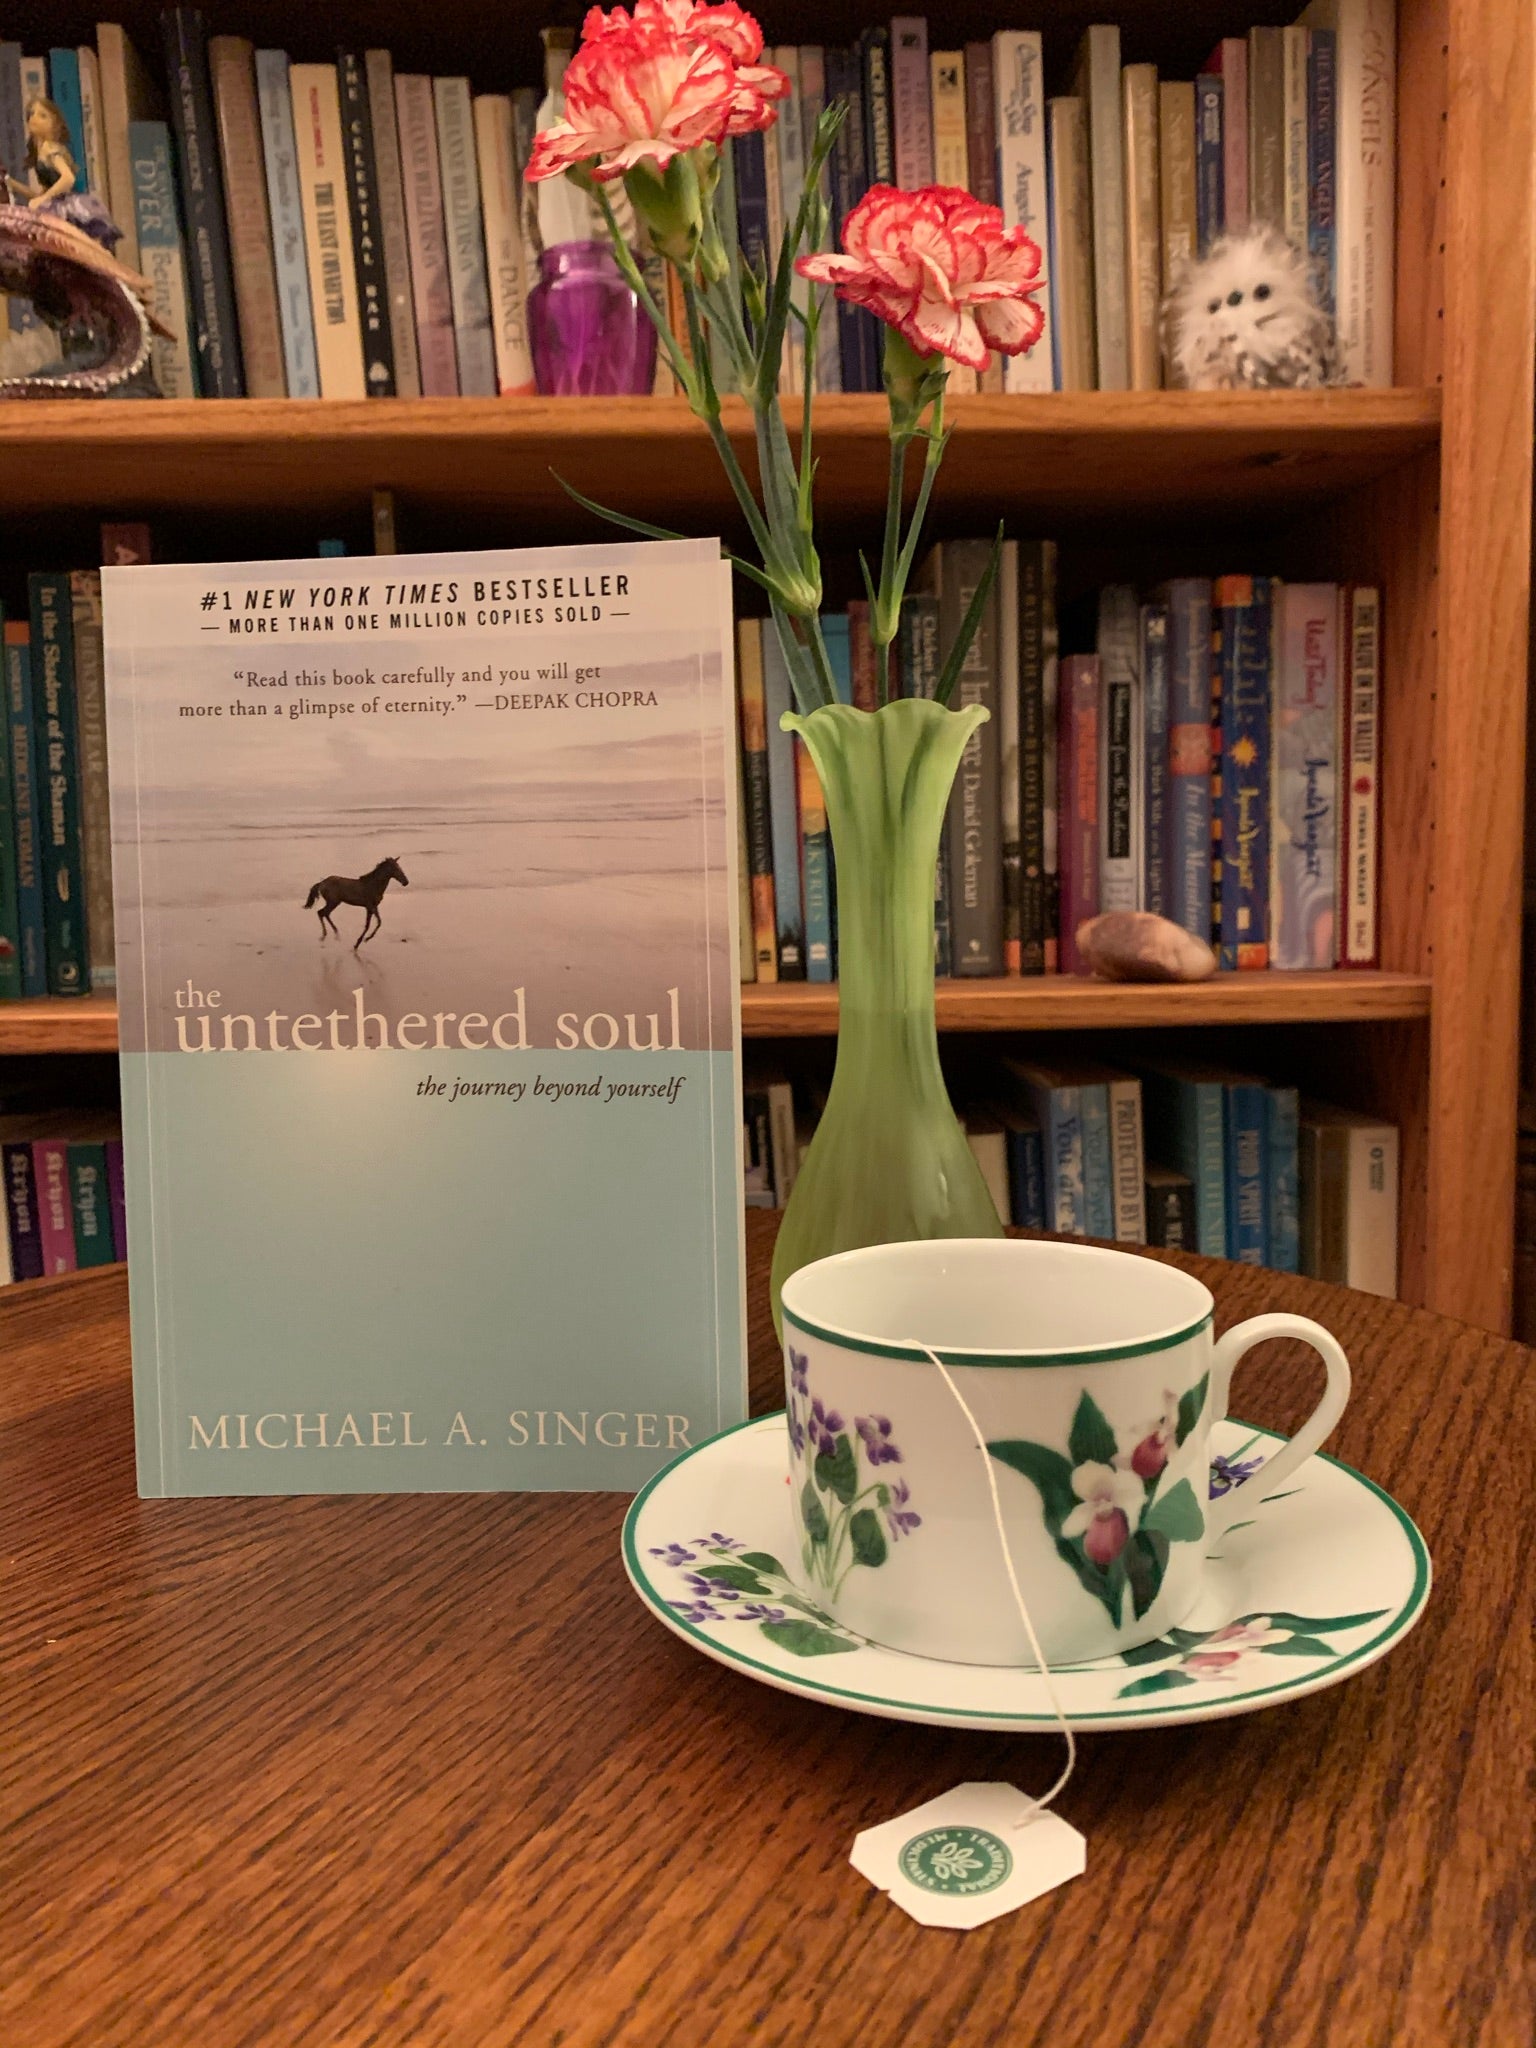 The Untethered Soul by Michael Singer is a guide to helping you to let go of your limitations and feel the boundlessness of true freedom - from the mind, the old unhealthy patterns and emotions. "East is East and West is West, but Michael Singer bridges these two great traditions in a radiant treatise on how to succeed in life from our spiritual quest to our everyday tribulations" (Ray Kurzweil).  Cost is $18.95